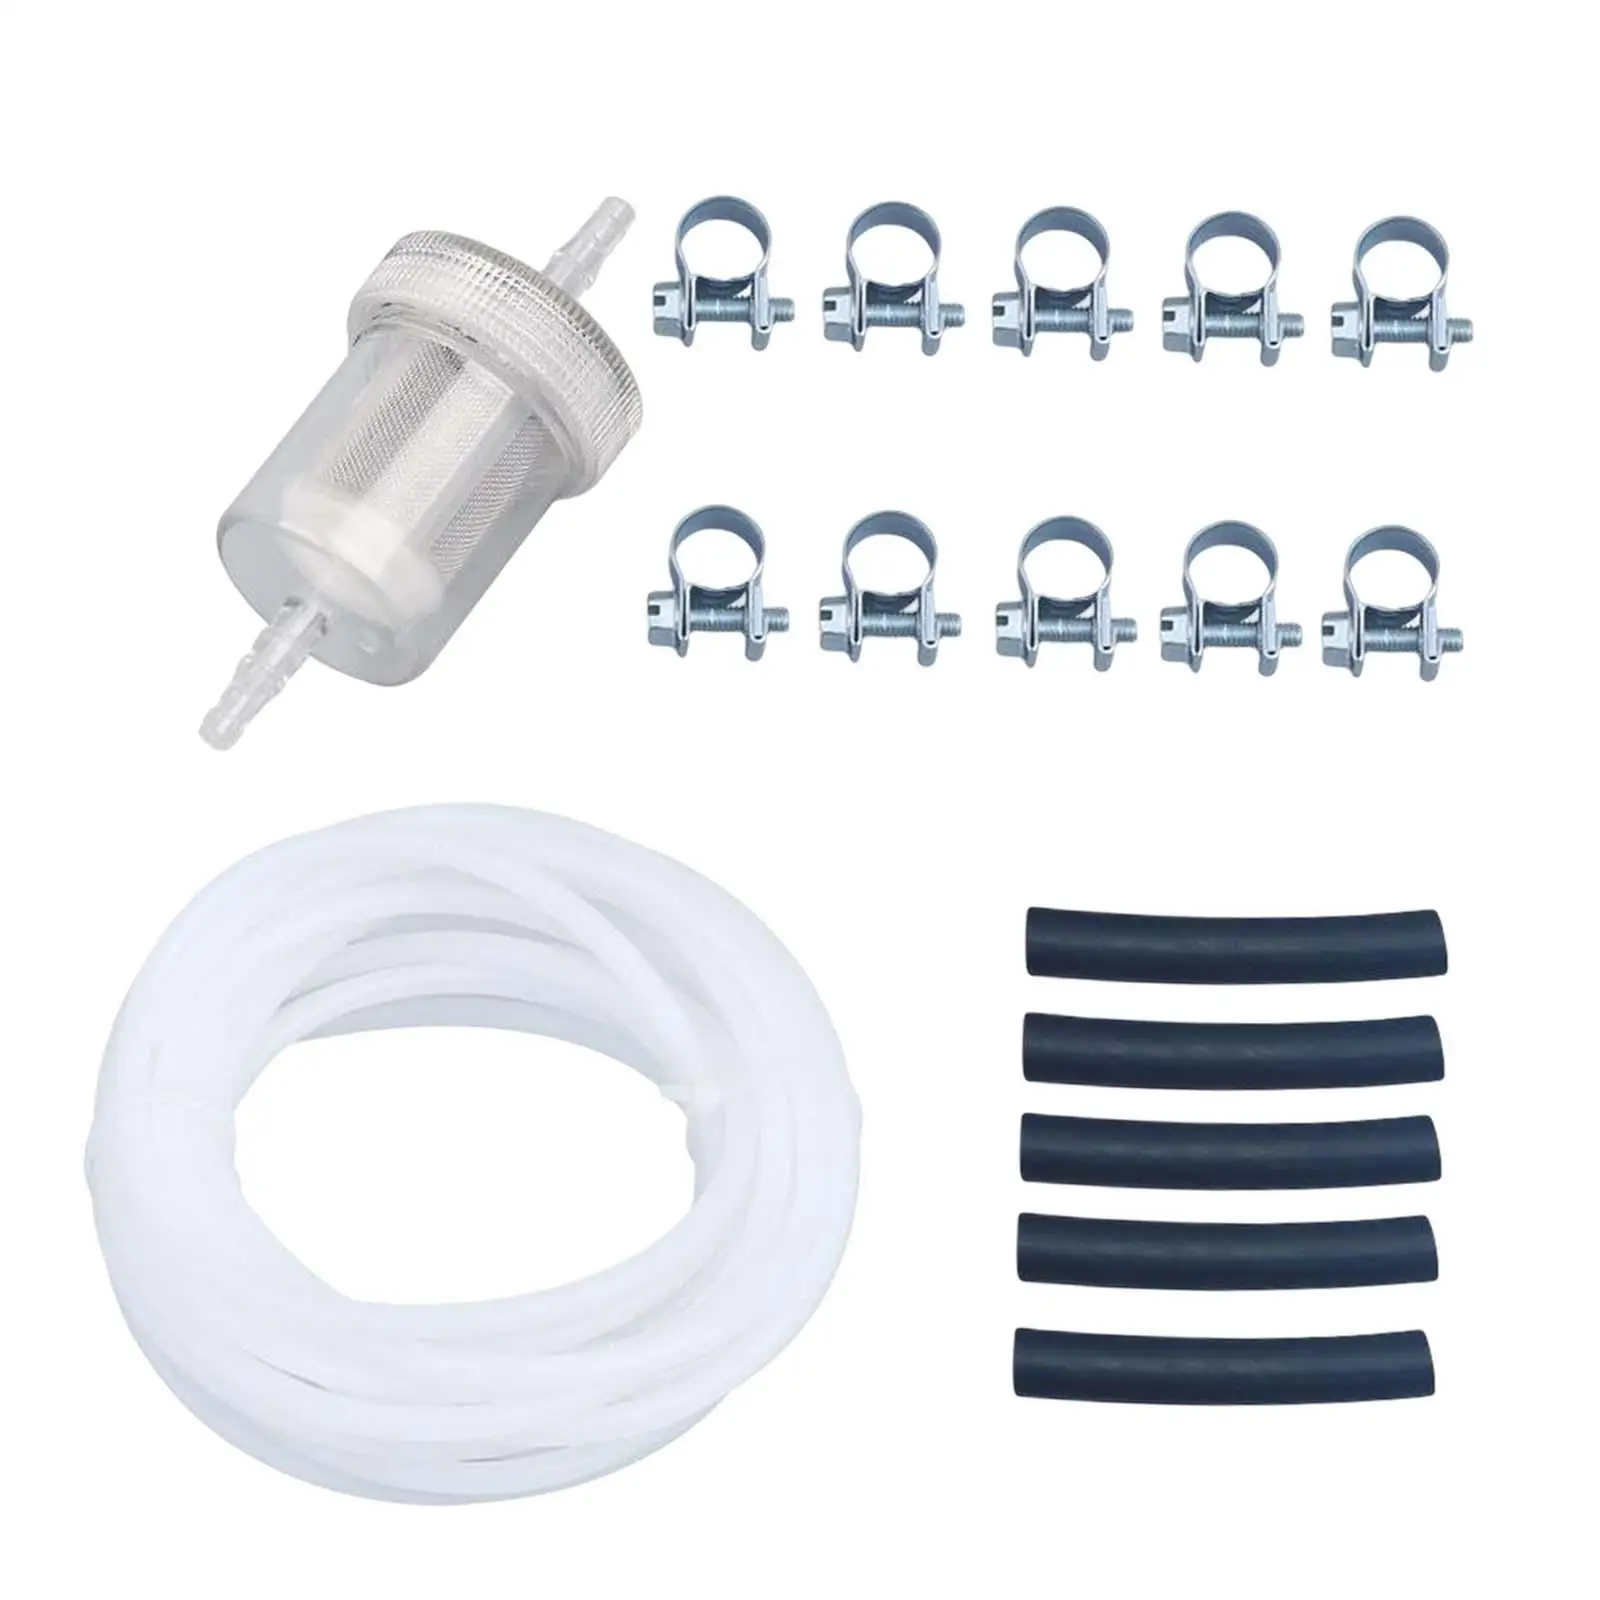 Fuel Pipe Line Hose Clip Kit for Heater Tank Professional